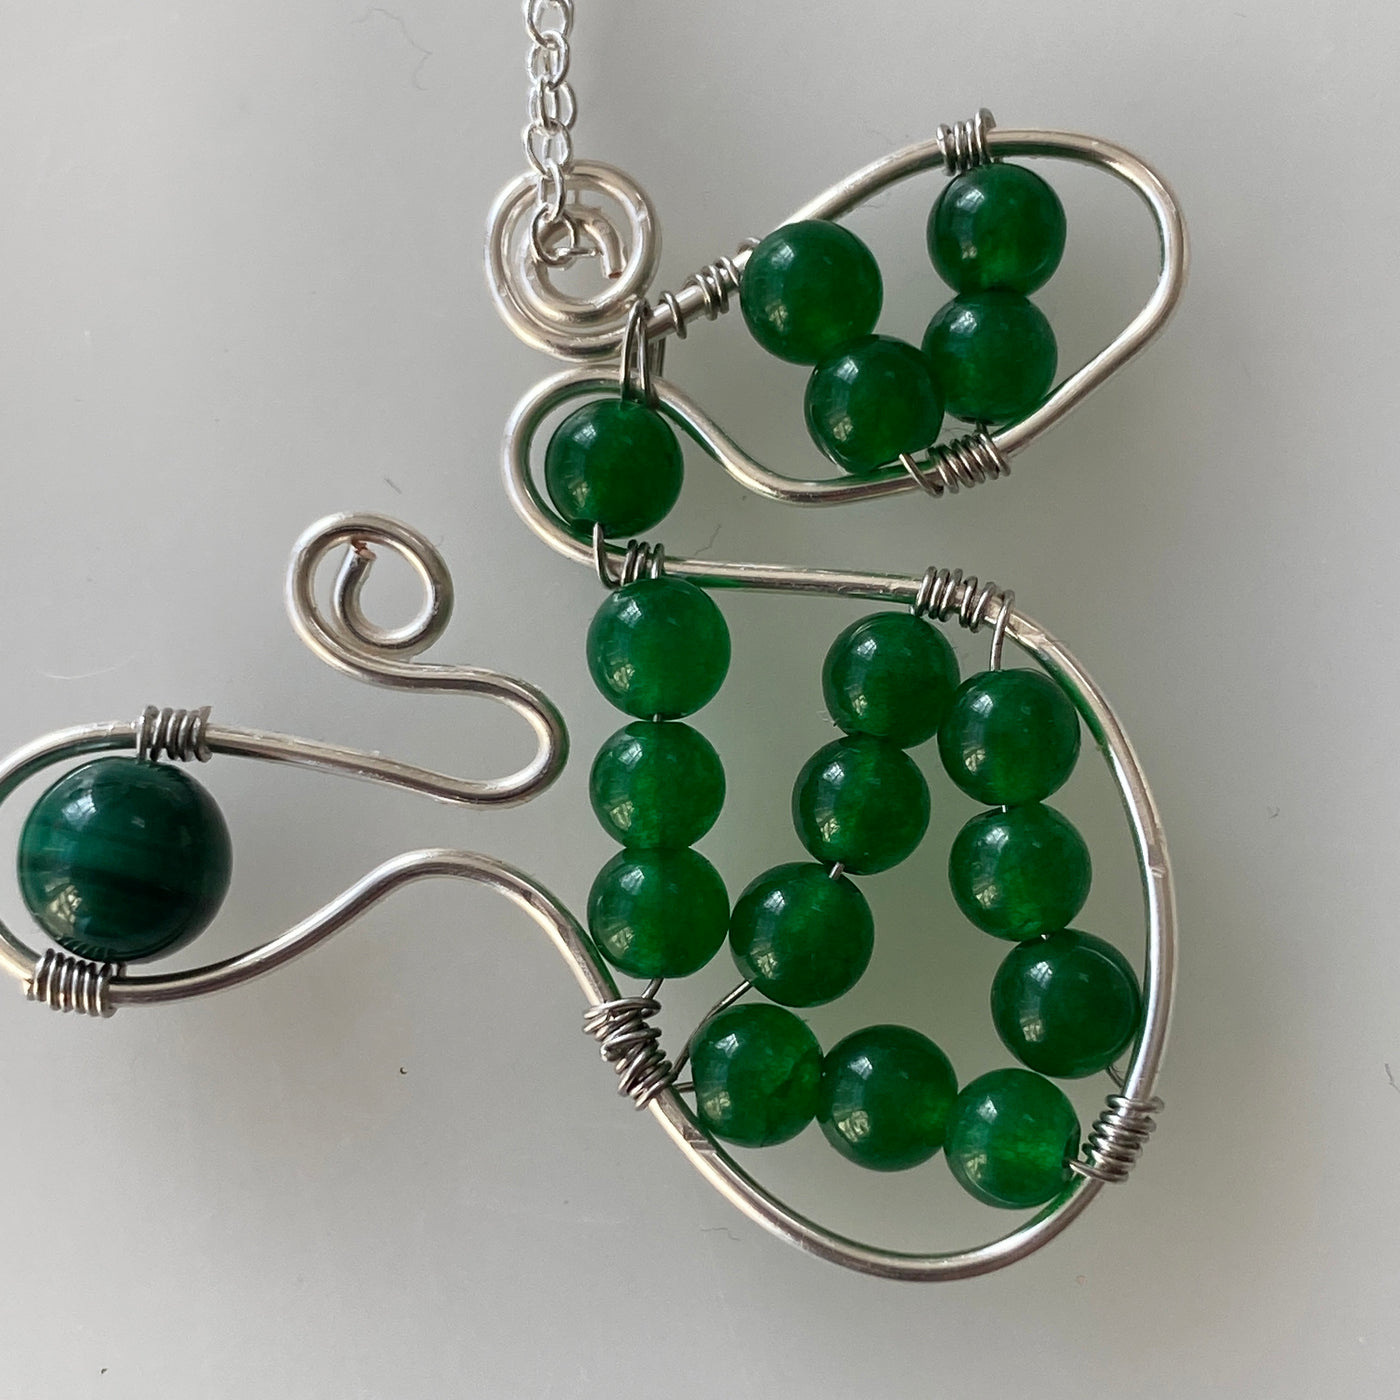 Pendant curly with green chalcedony 4 mm and silver